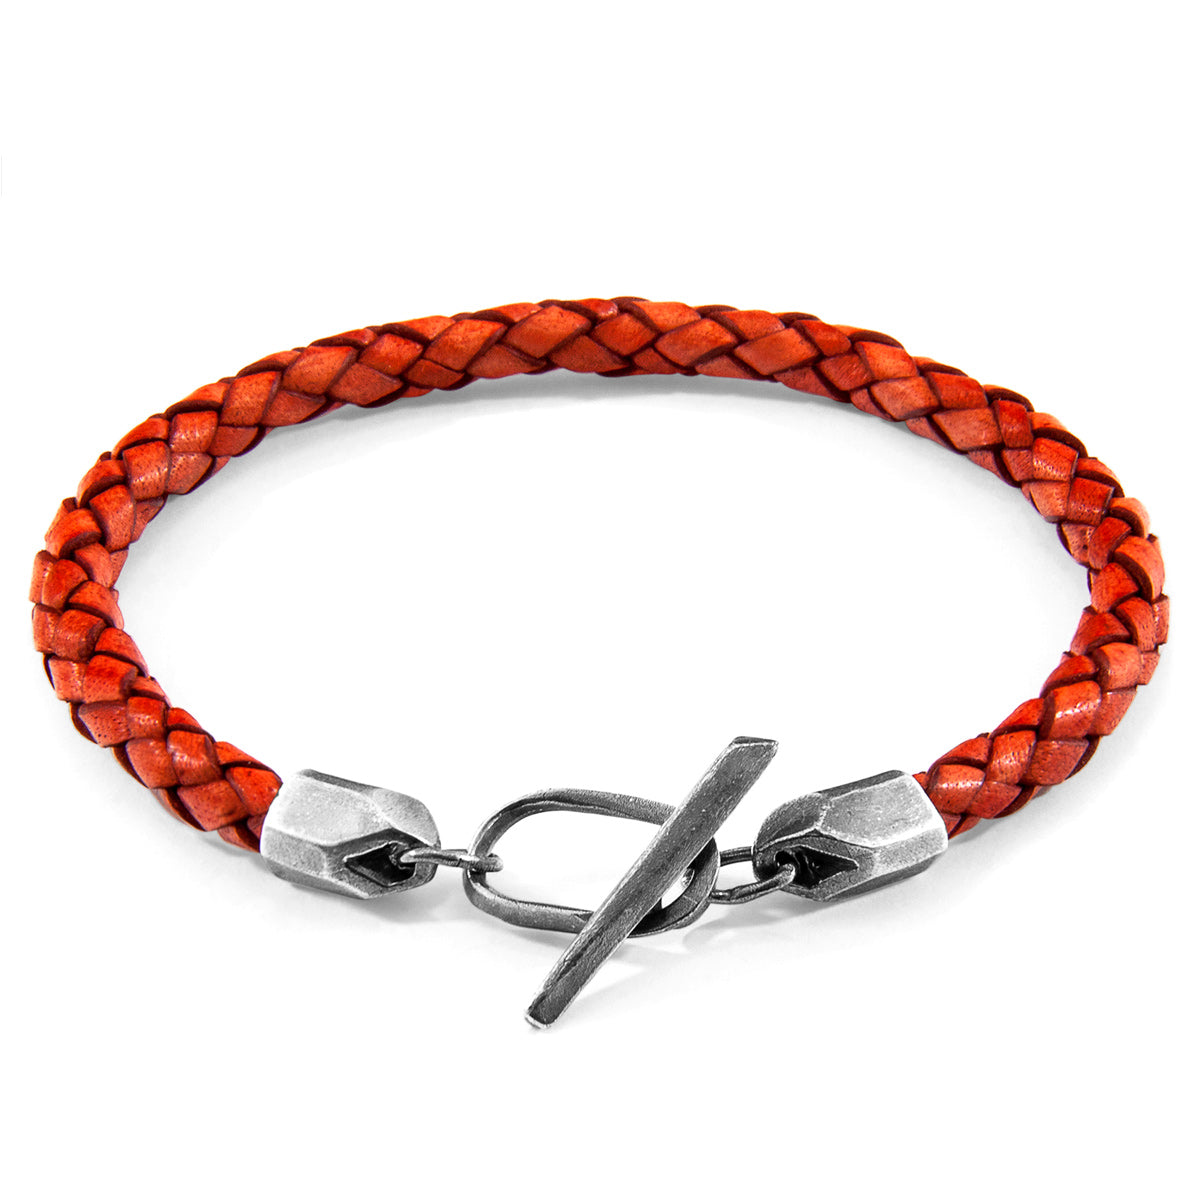 Amber Red Jura Silver and Braided Leather Bracelet